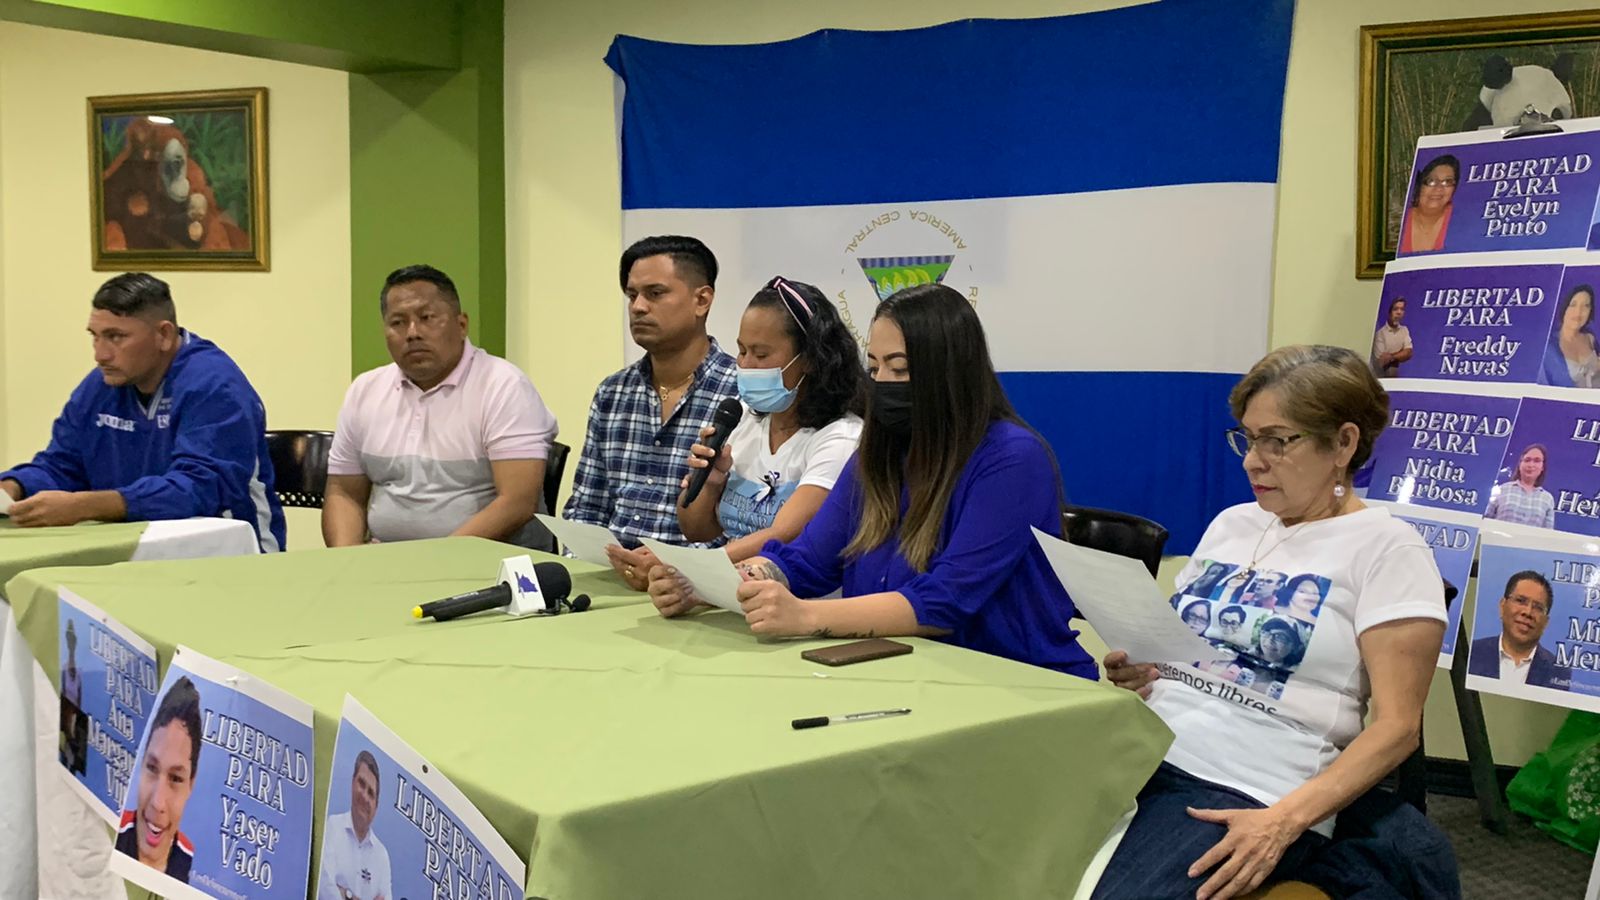 Nicaraguans in exile will protest on the fourth anniversary of the April Rebellion